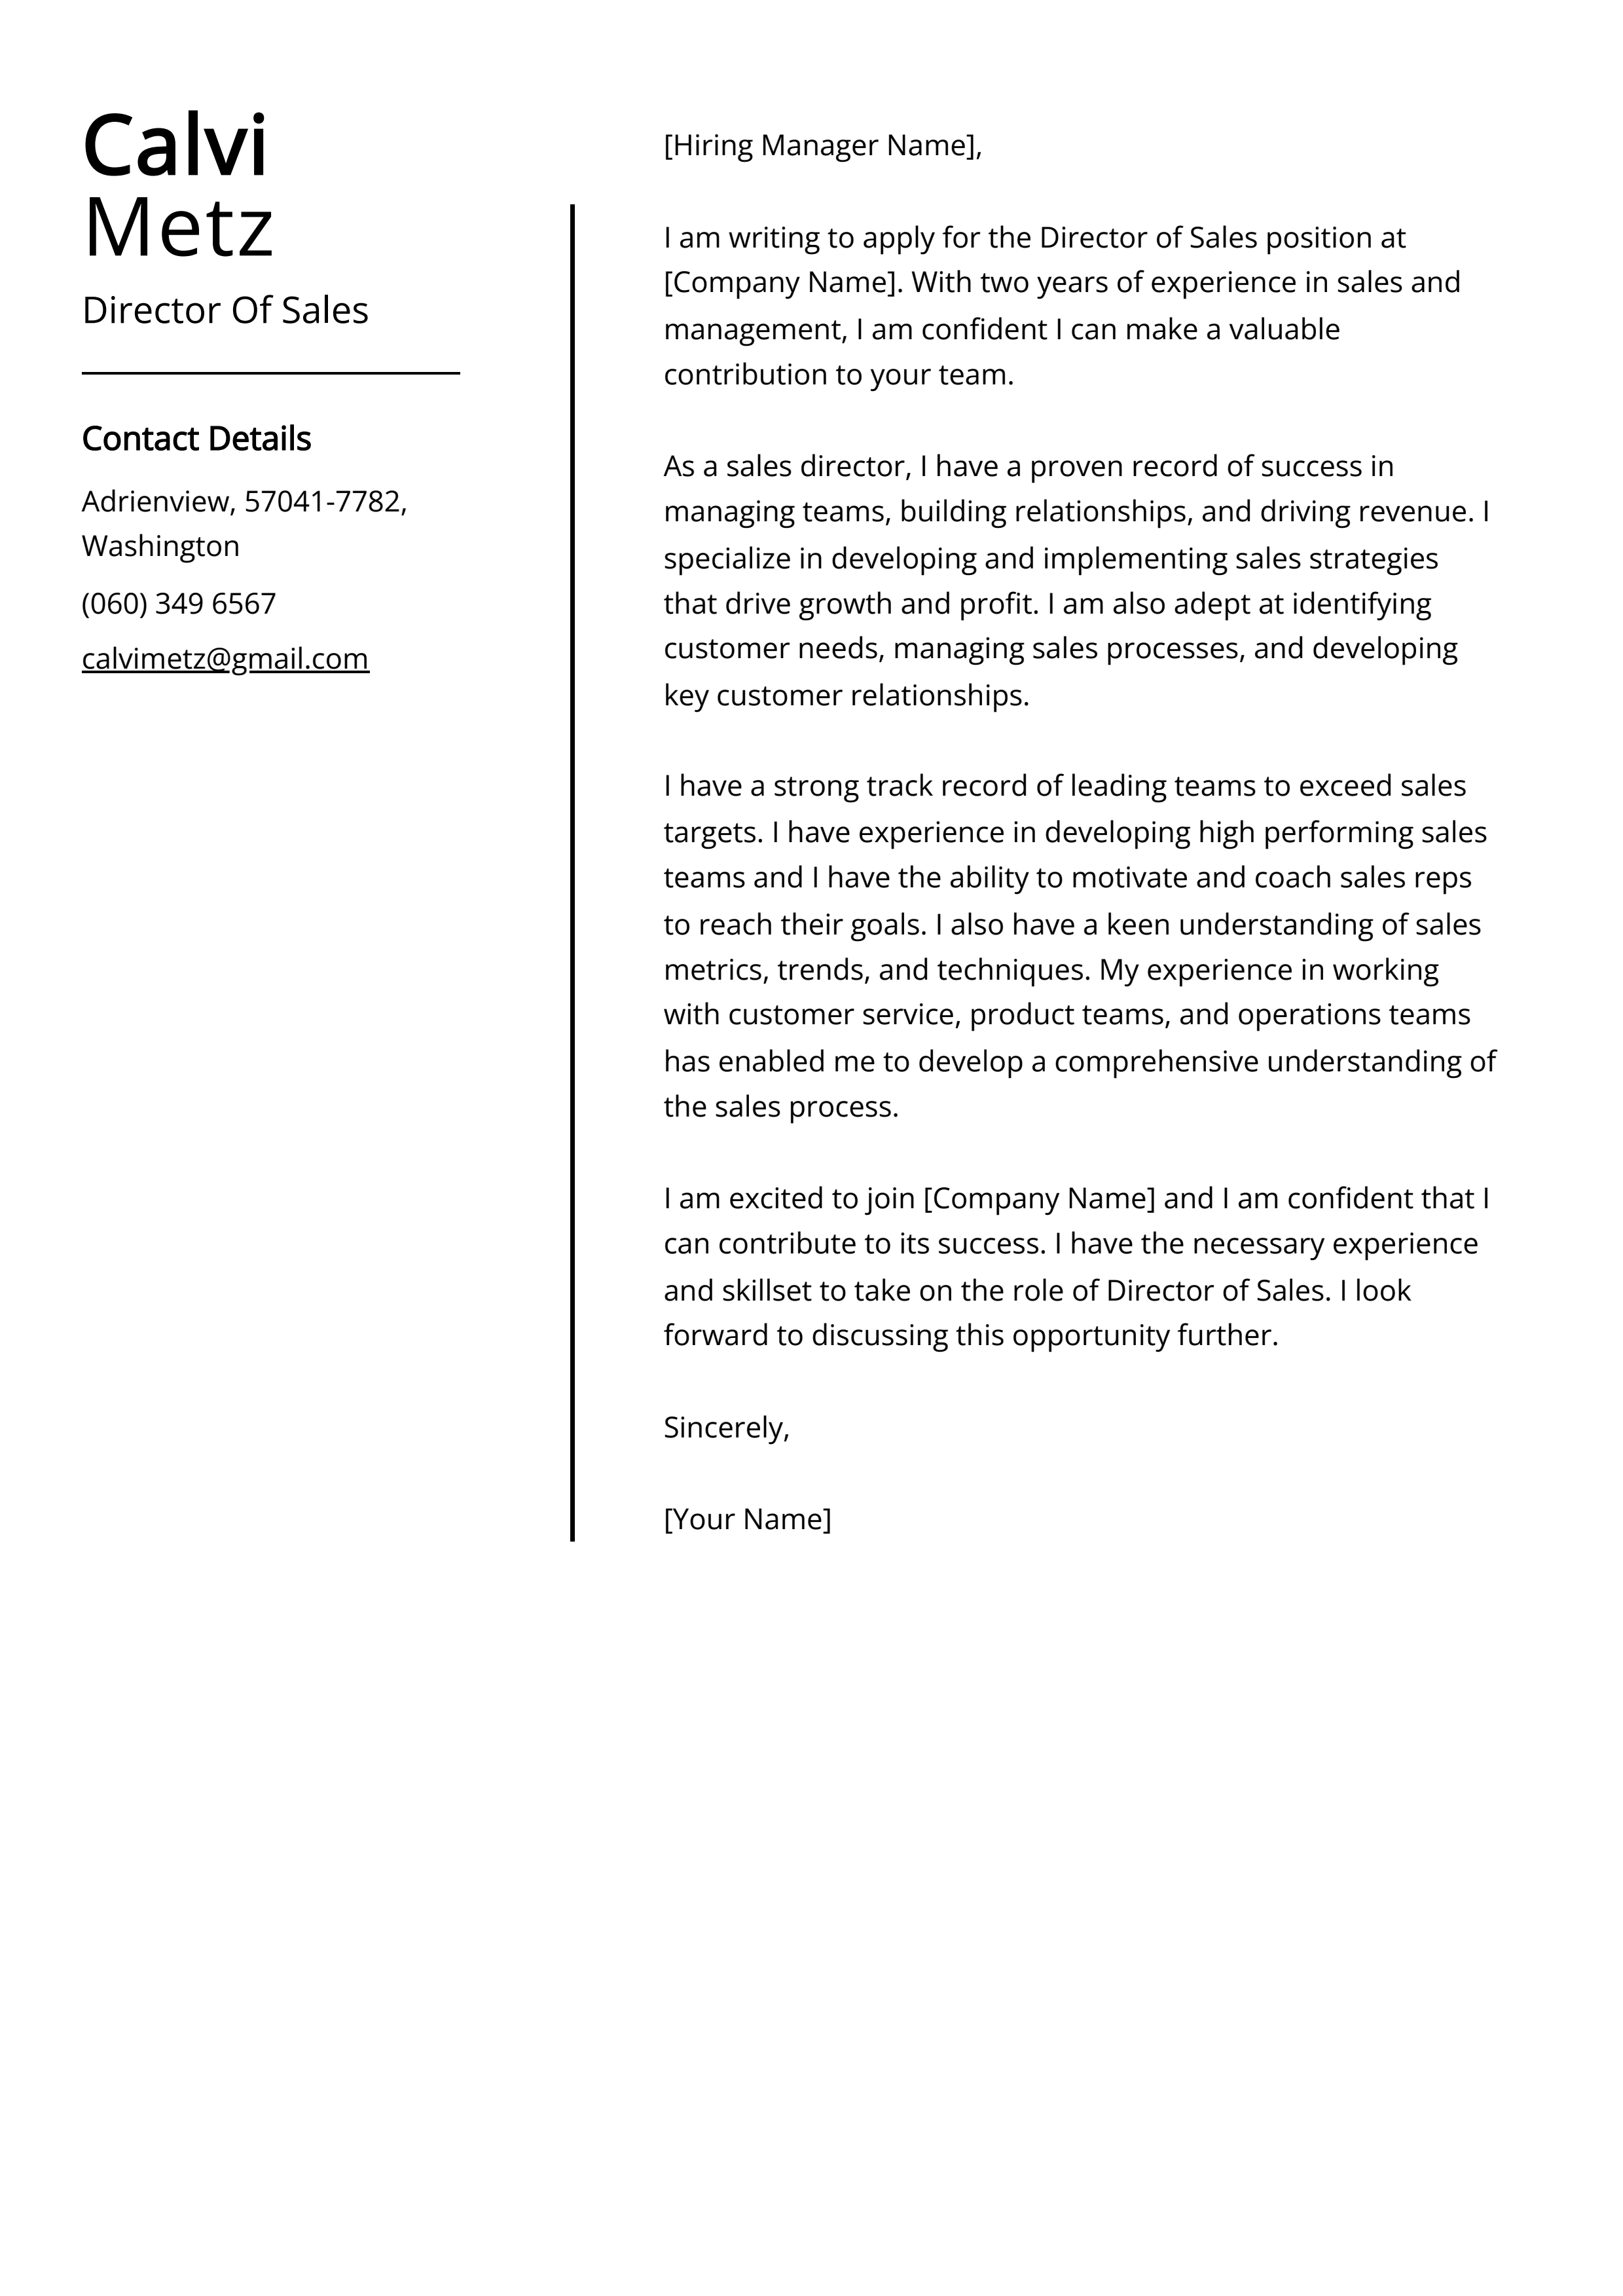 Director Of Sales Cover Letter Example